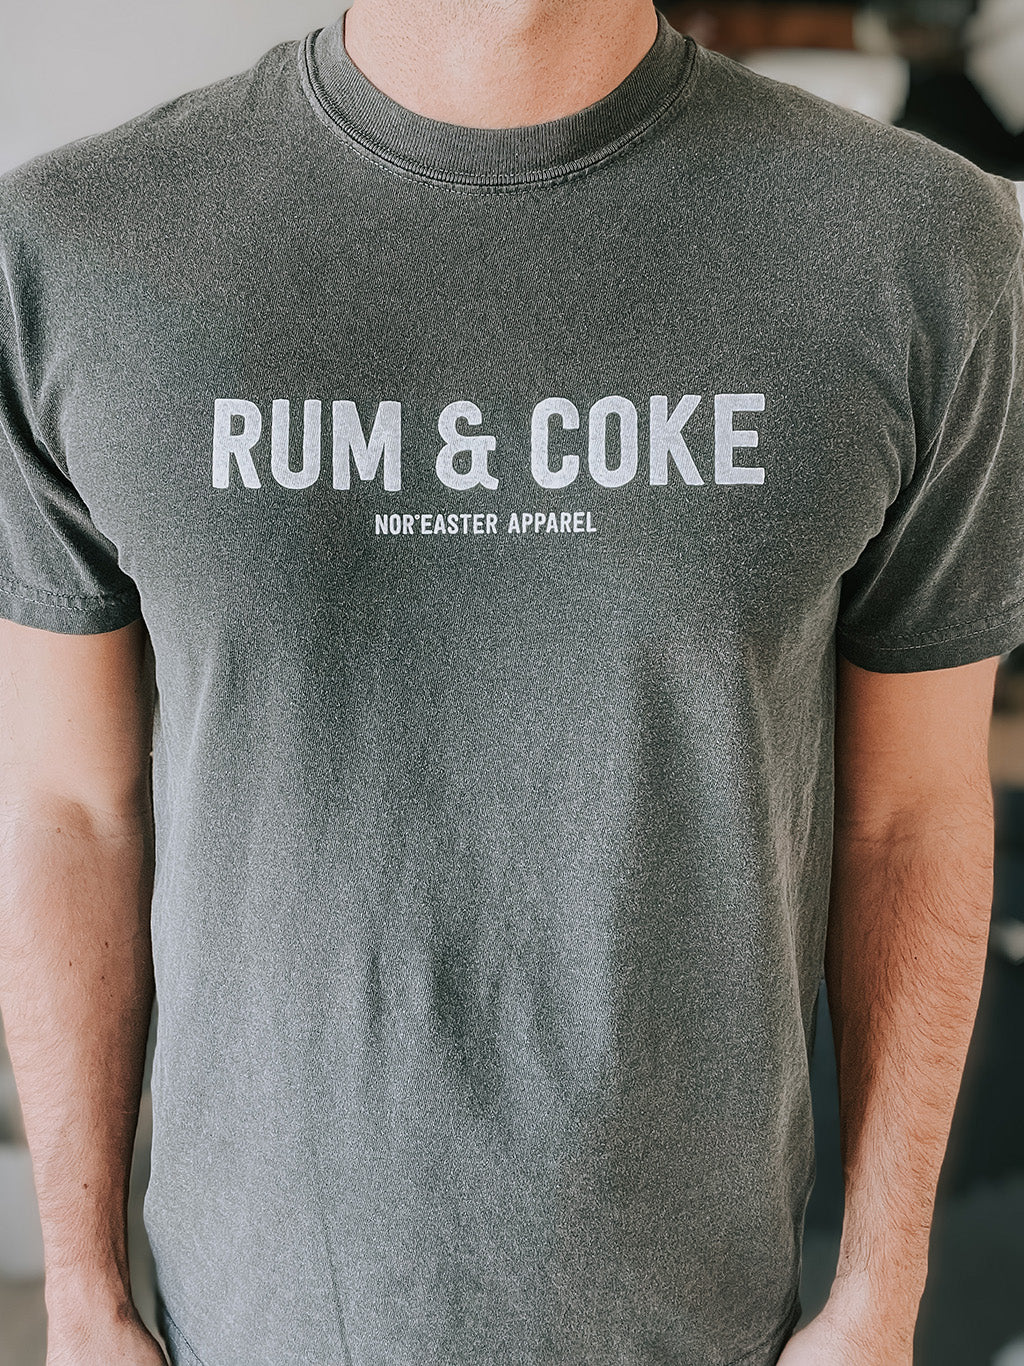 nor'easter apparel rum and coke t-shirt on a man close view